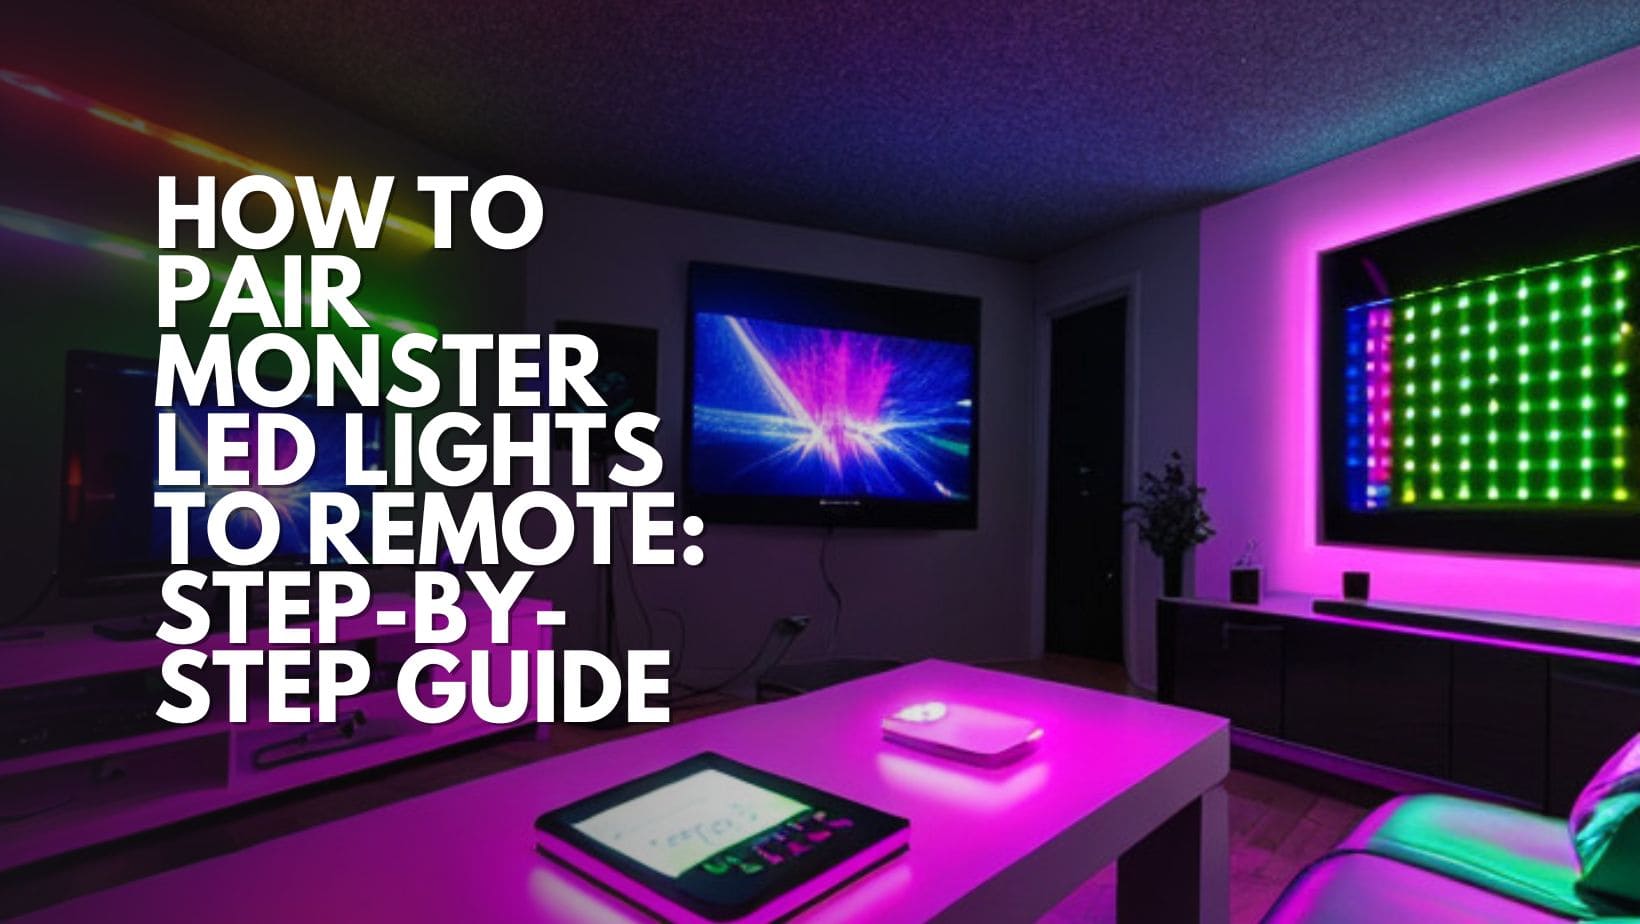 How to pair monster LED lights to remote